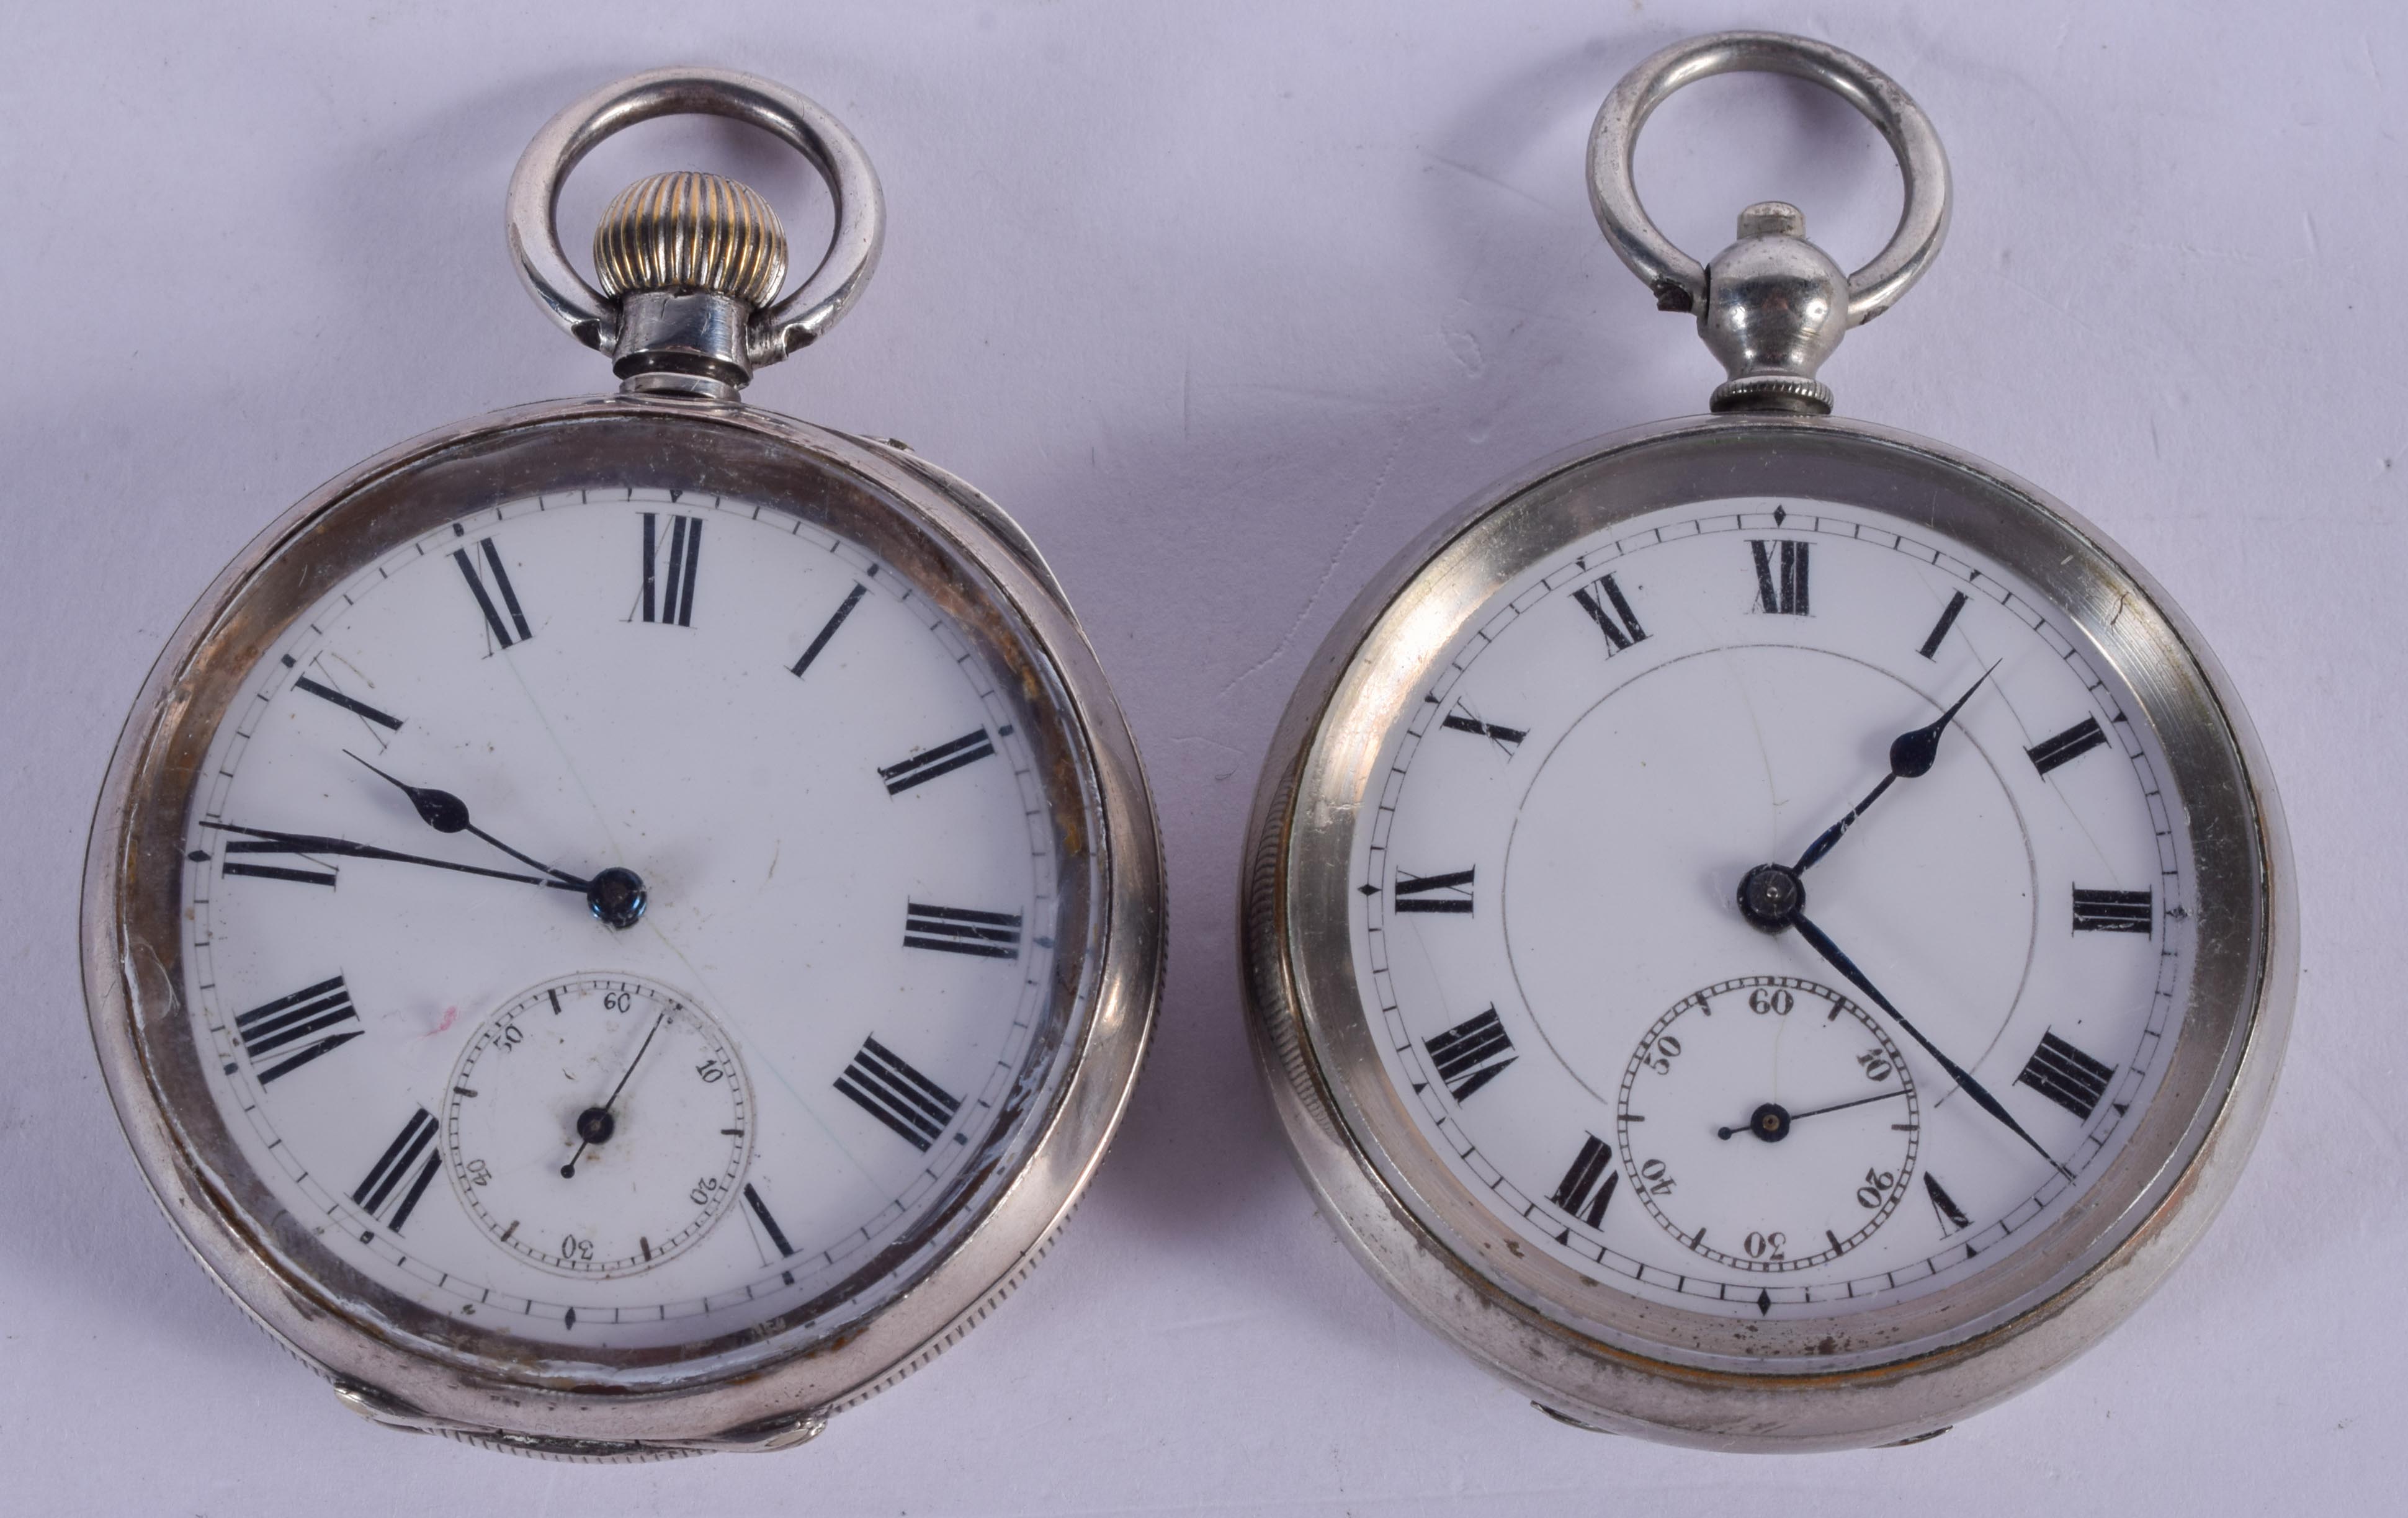 AN ANTIQUE SILVER POCKET WATCH and another plated watch. Largest 5.25 cm diameter. (2)